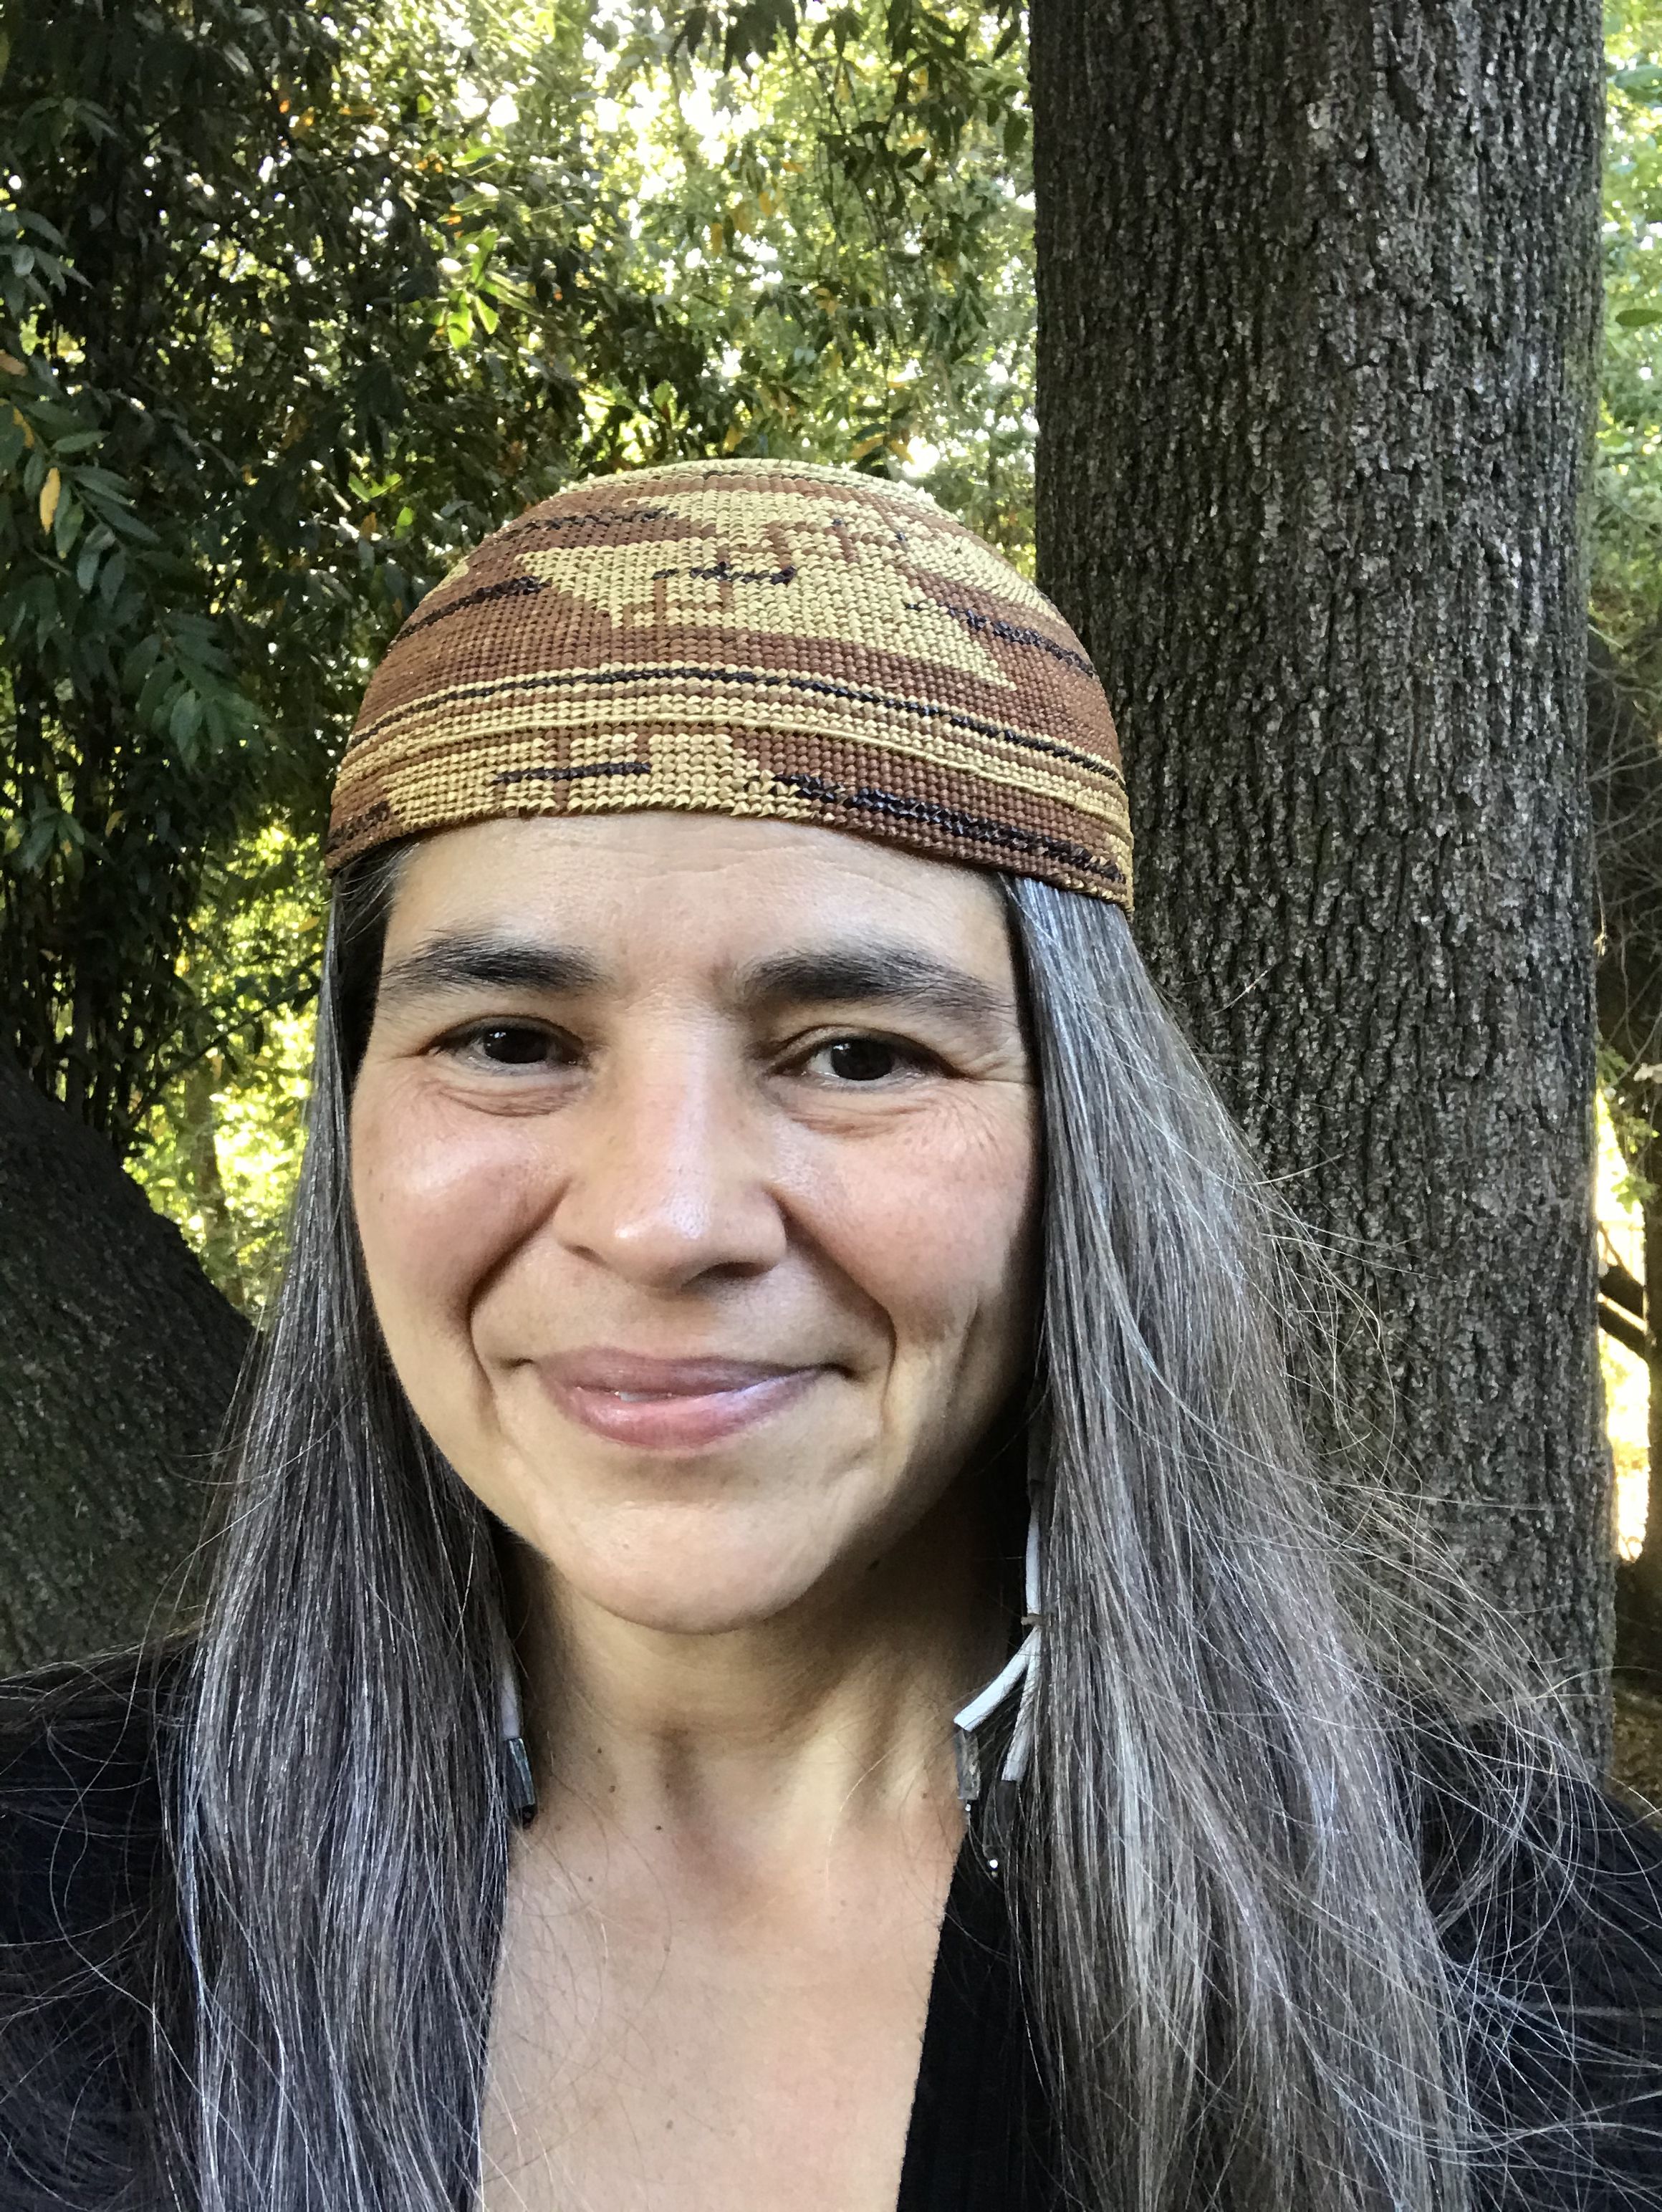 Carolyn Smith smiles at the camera, wearing a woven basket on her head. A tree trunk is in the background.